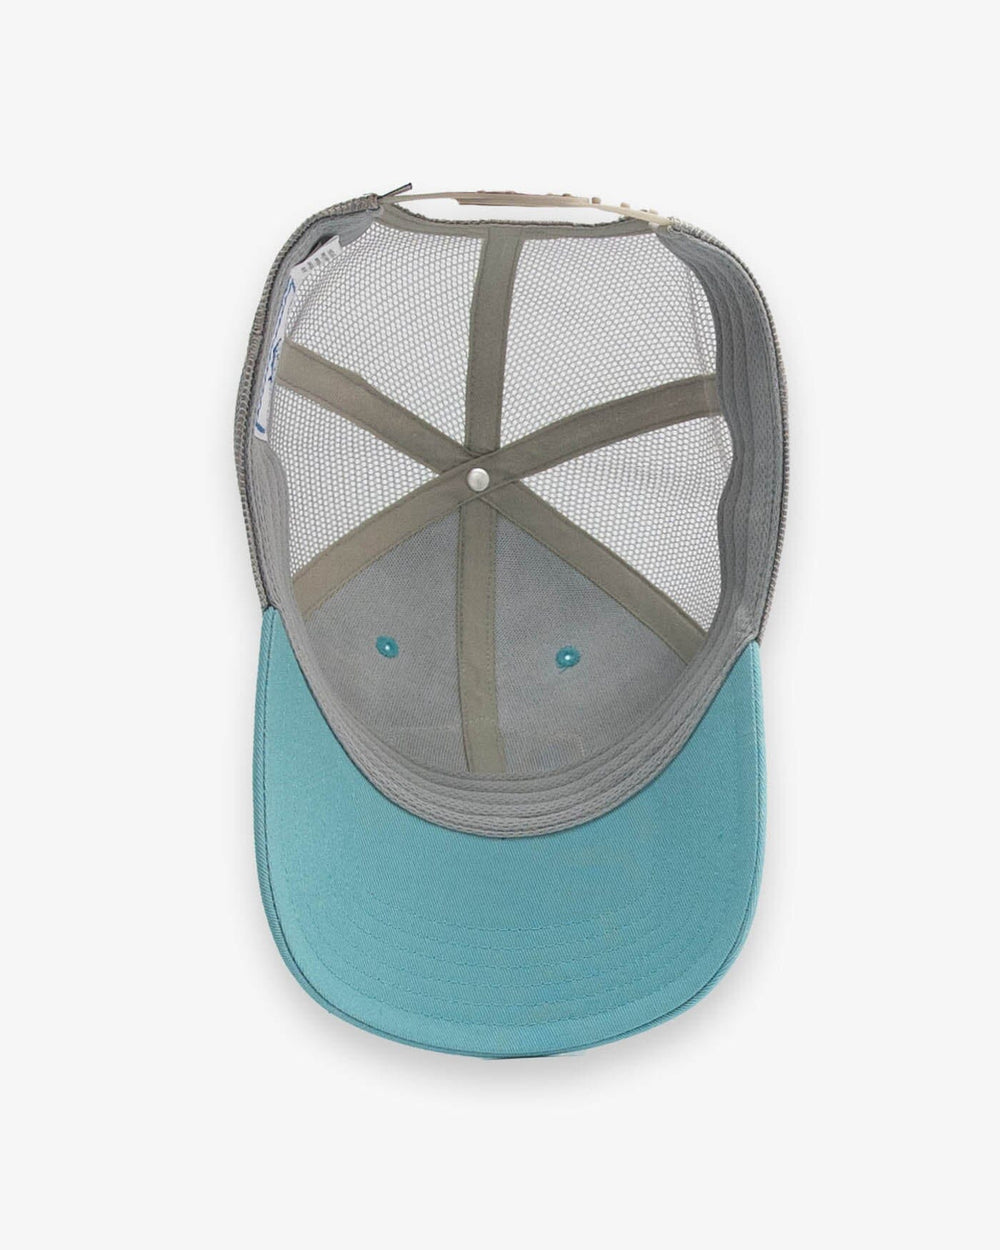 The detail view of the Southern Tide Kids Skipjack Trademark Trucker Hat by Southern Tide - Blue